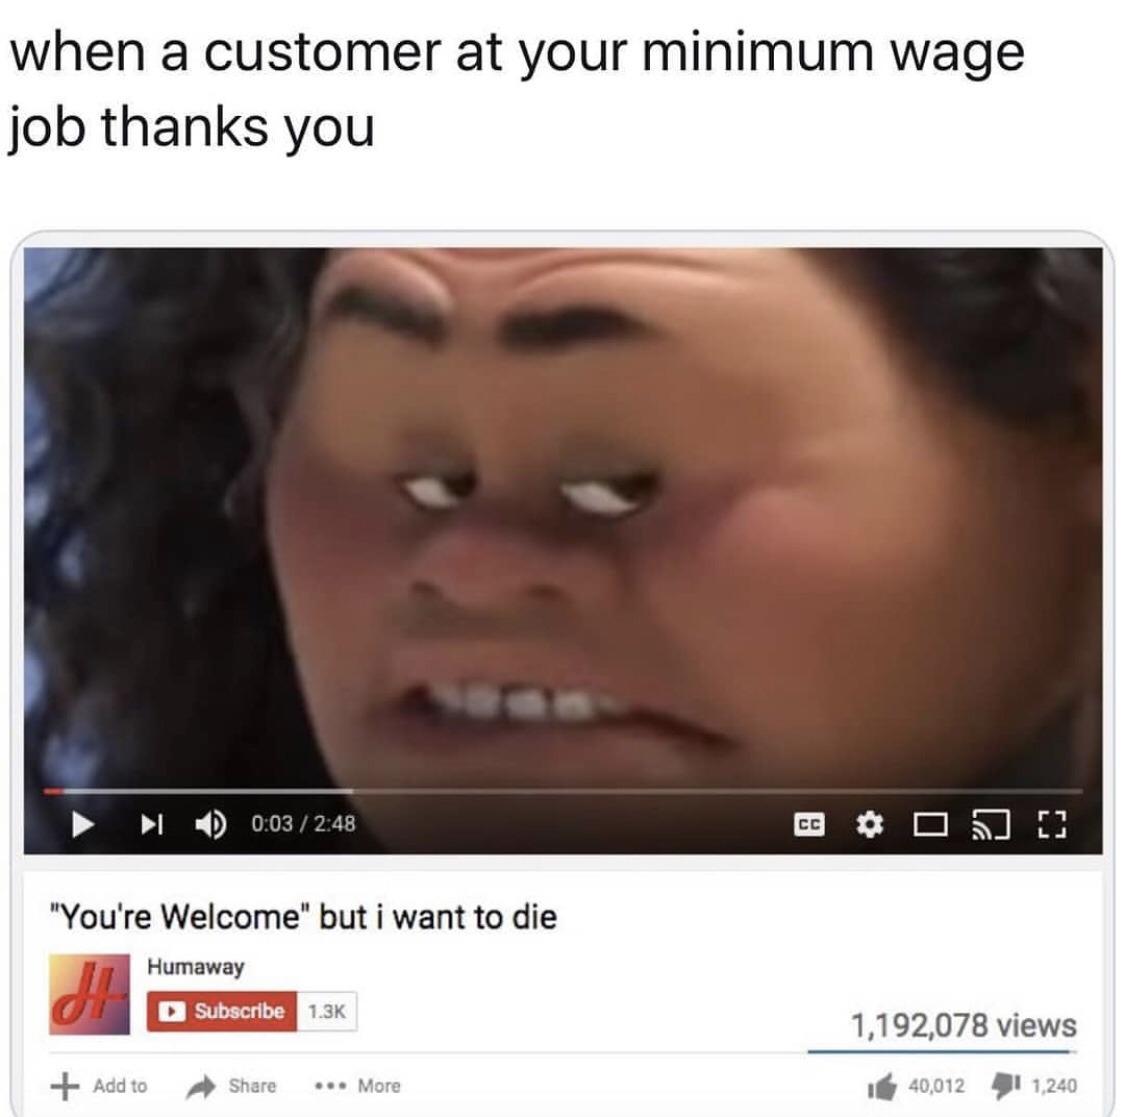 depression depression-memes depression text: when a customer at your minimum wage job thanks you 4) 0:03 / 2:48 